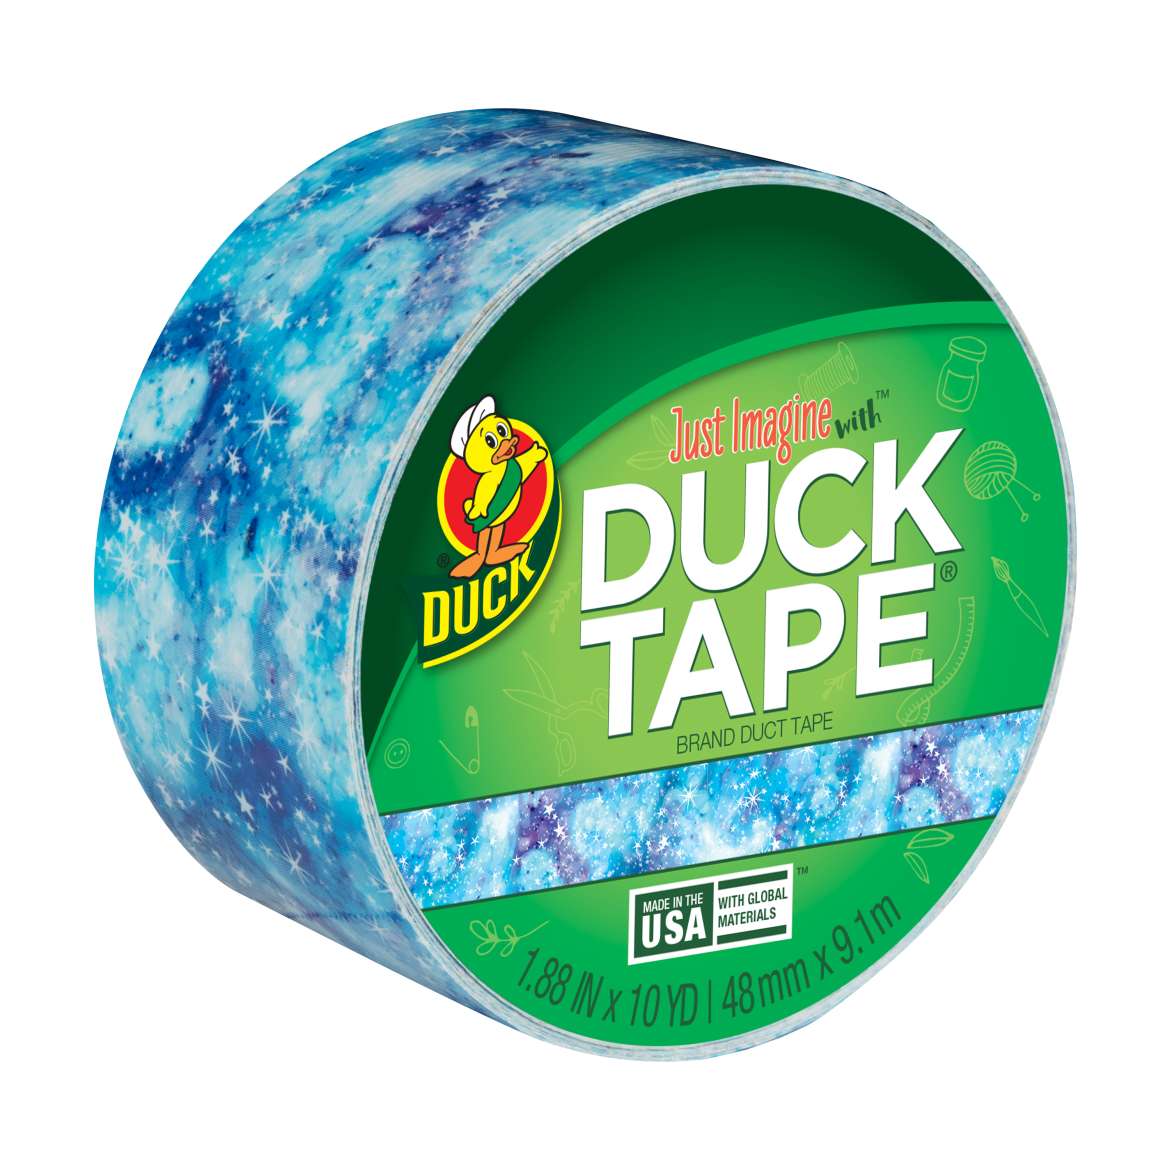 Printed Duck Tape® Brand Duct Tape - Starry Galaxy 1.88 in. x 10 yd.